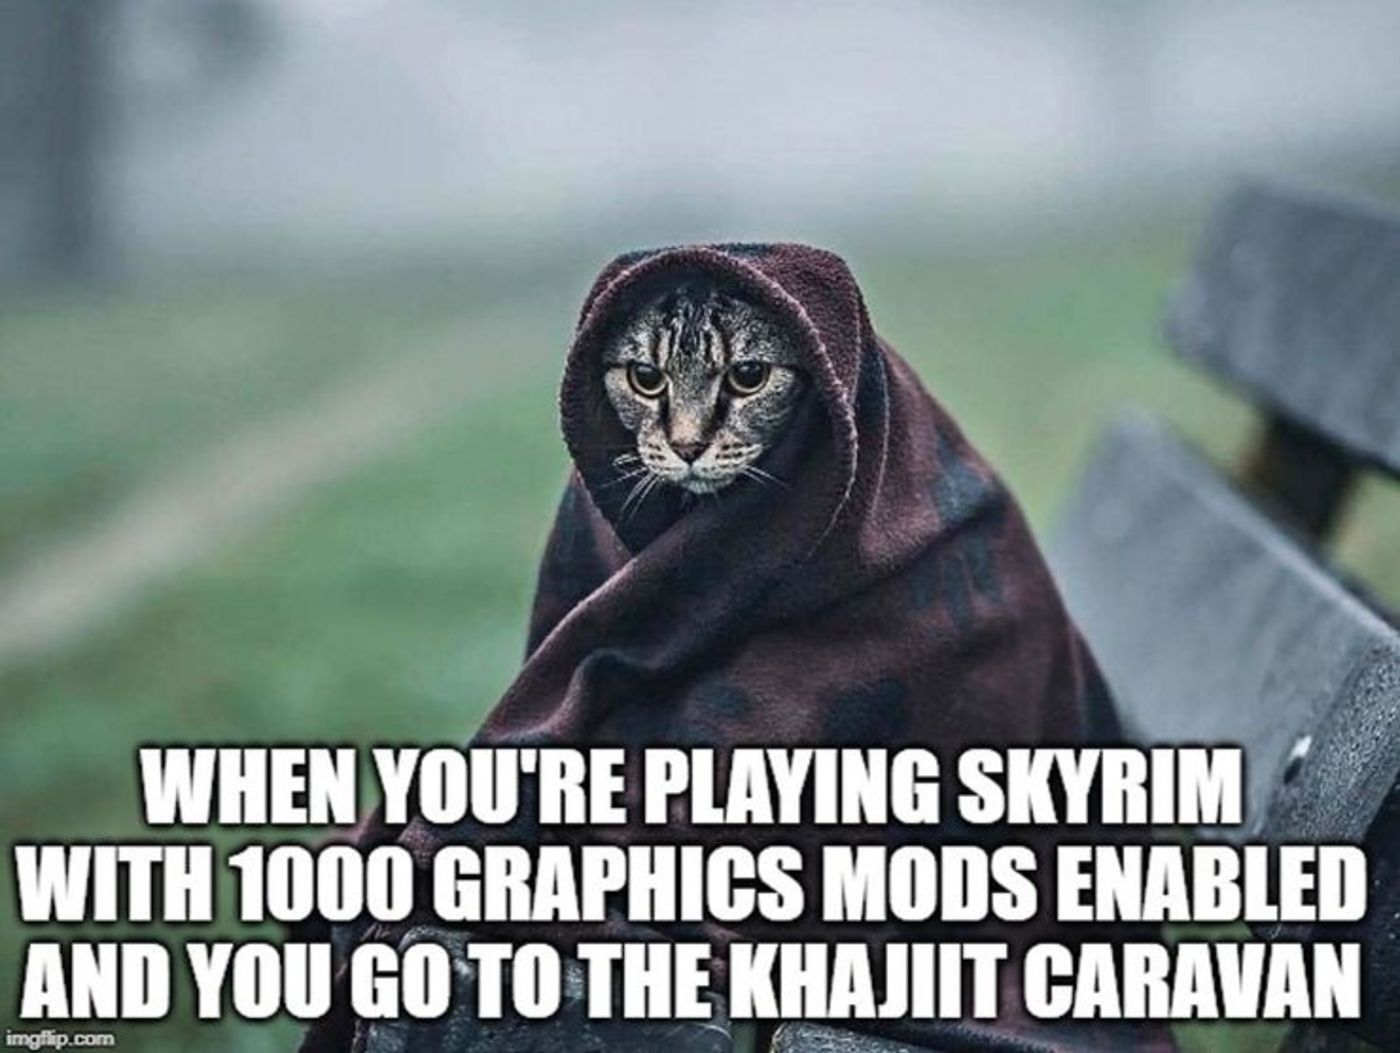 khajiit does not play these games